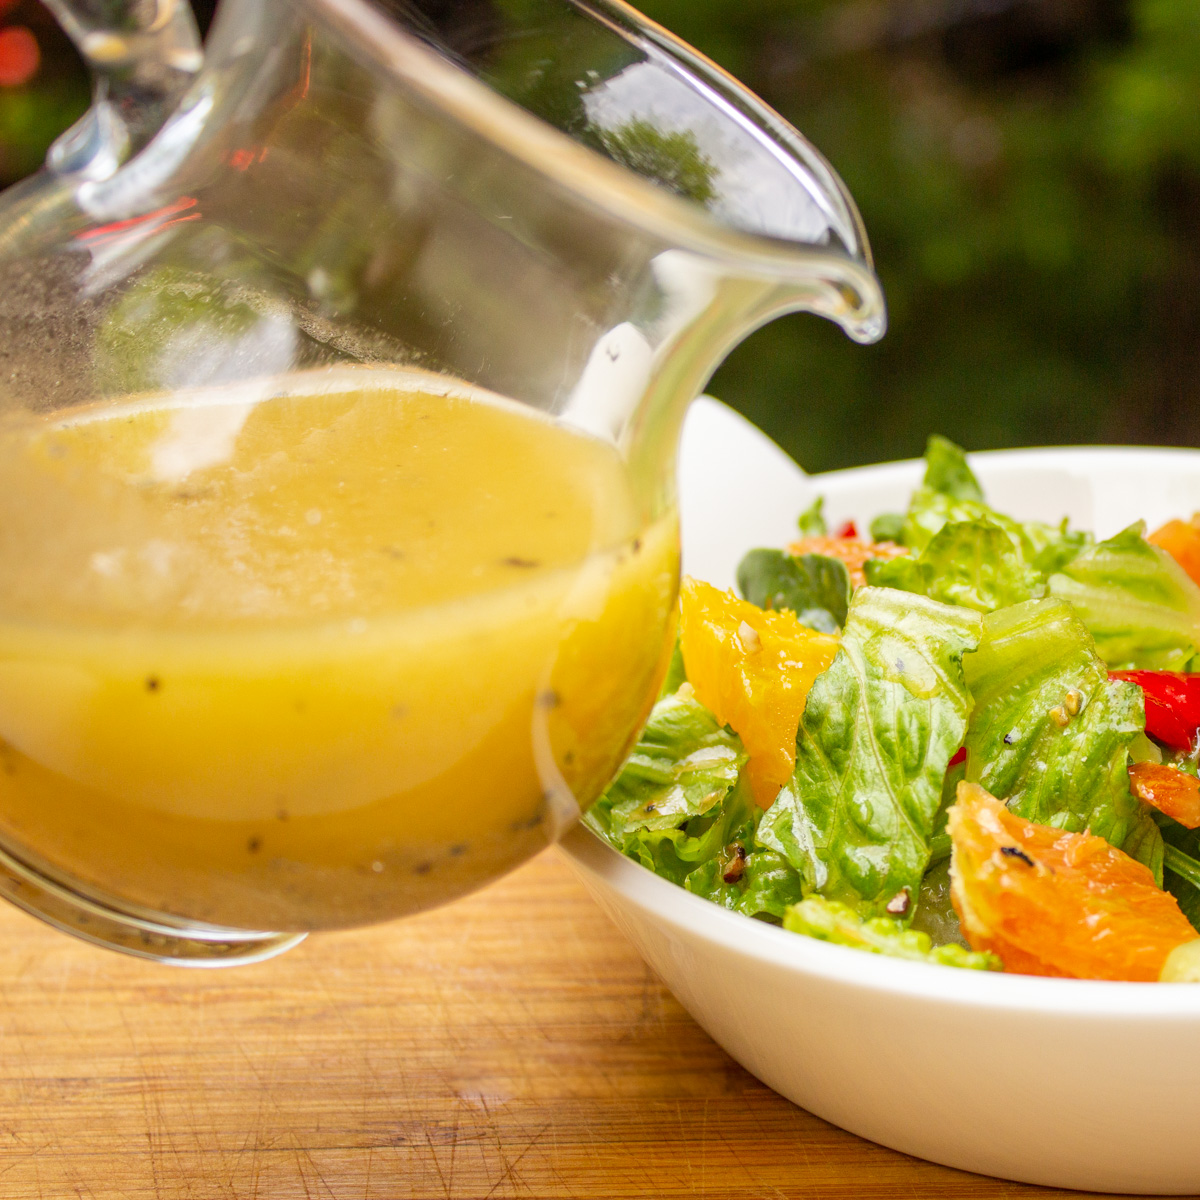 pitcher tipped over salad to pour honey lemon dressing.